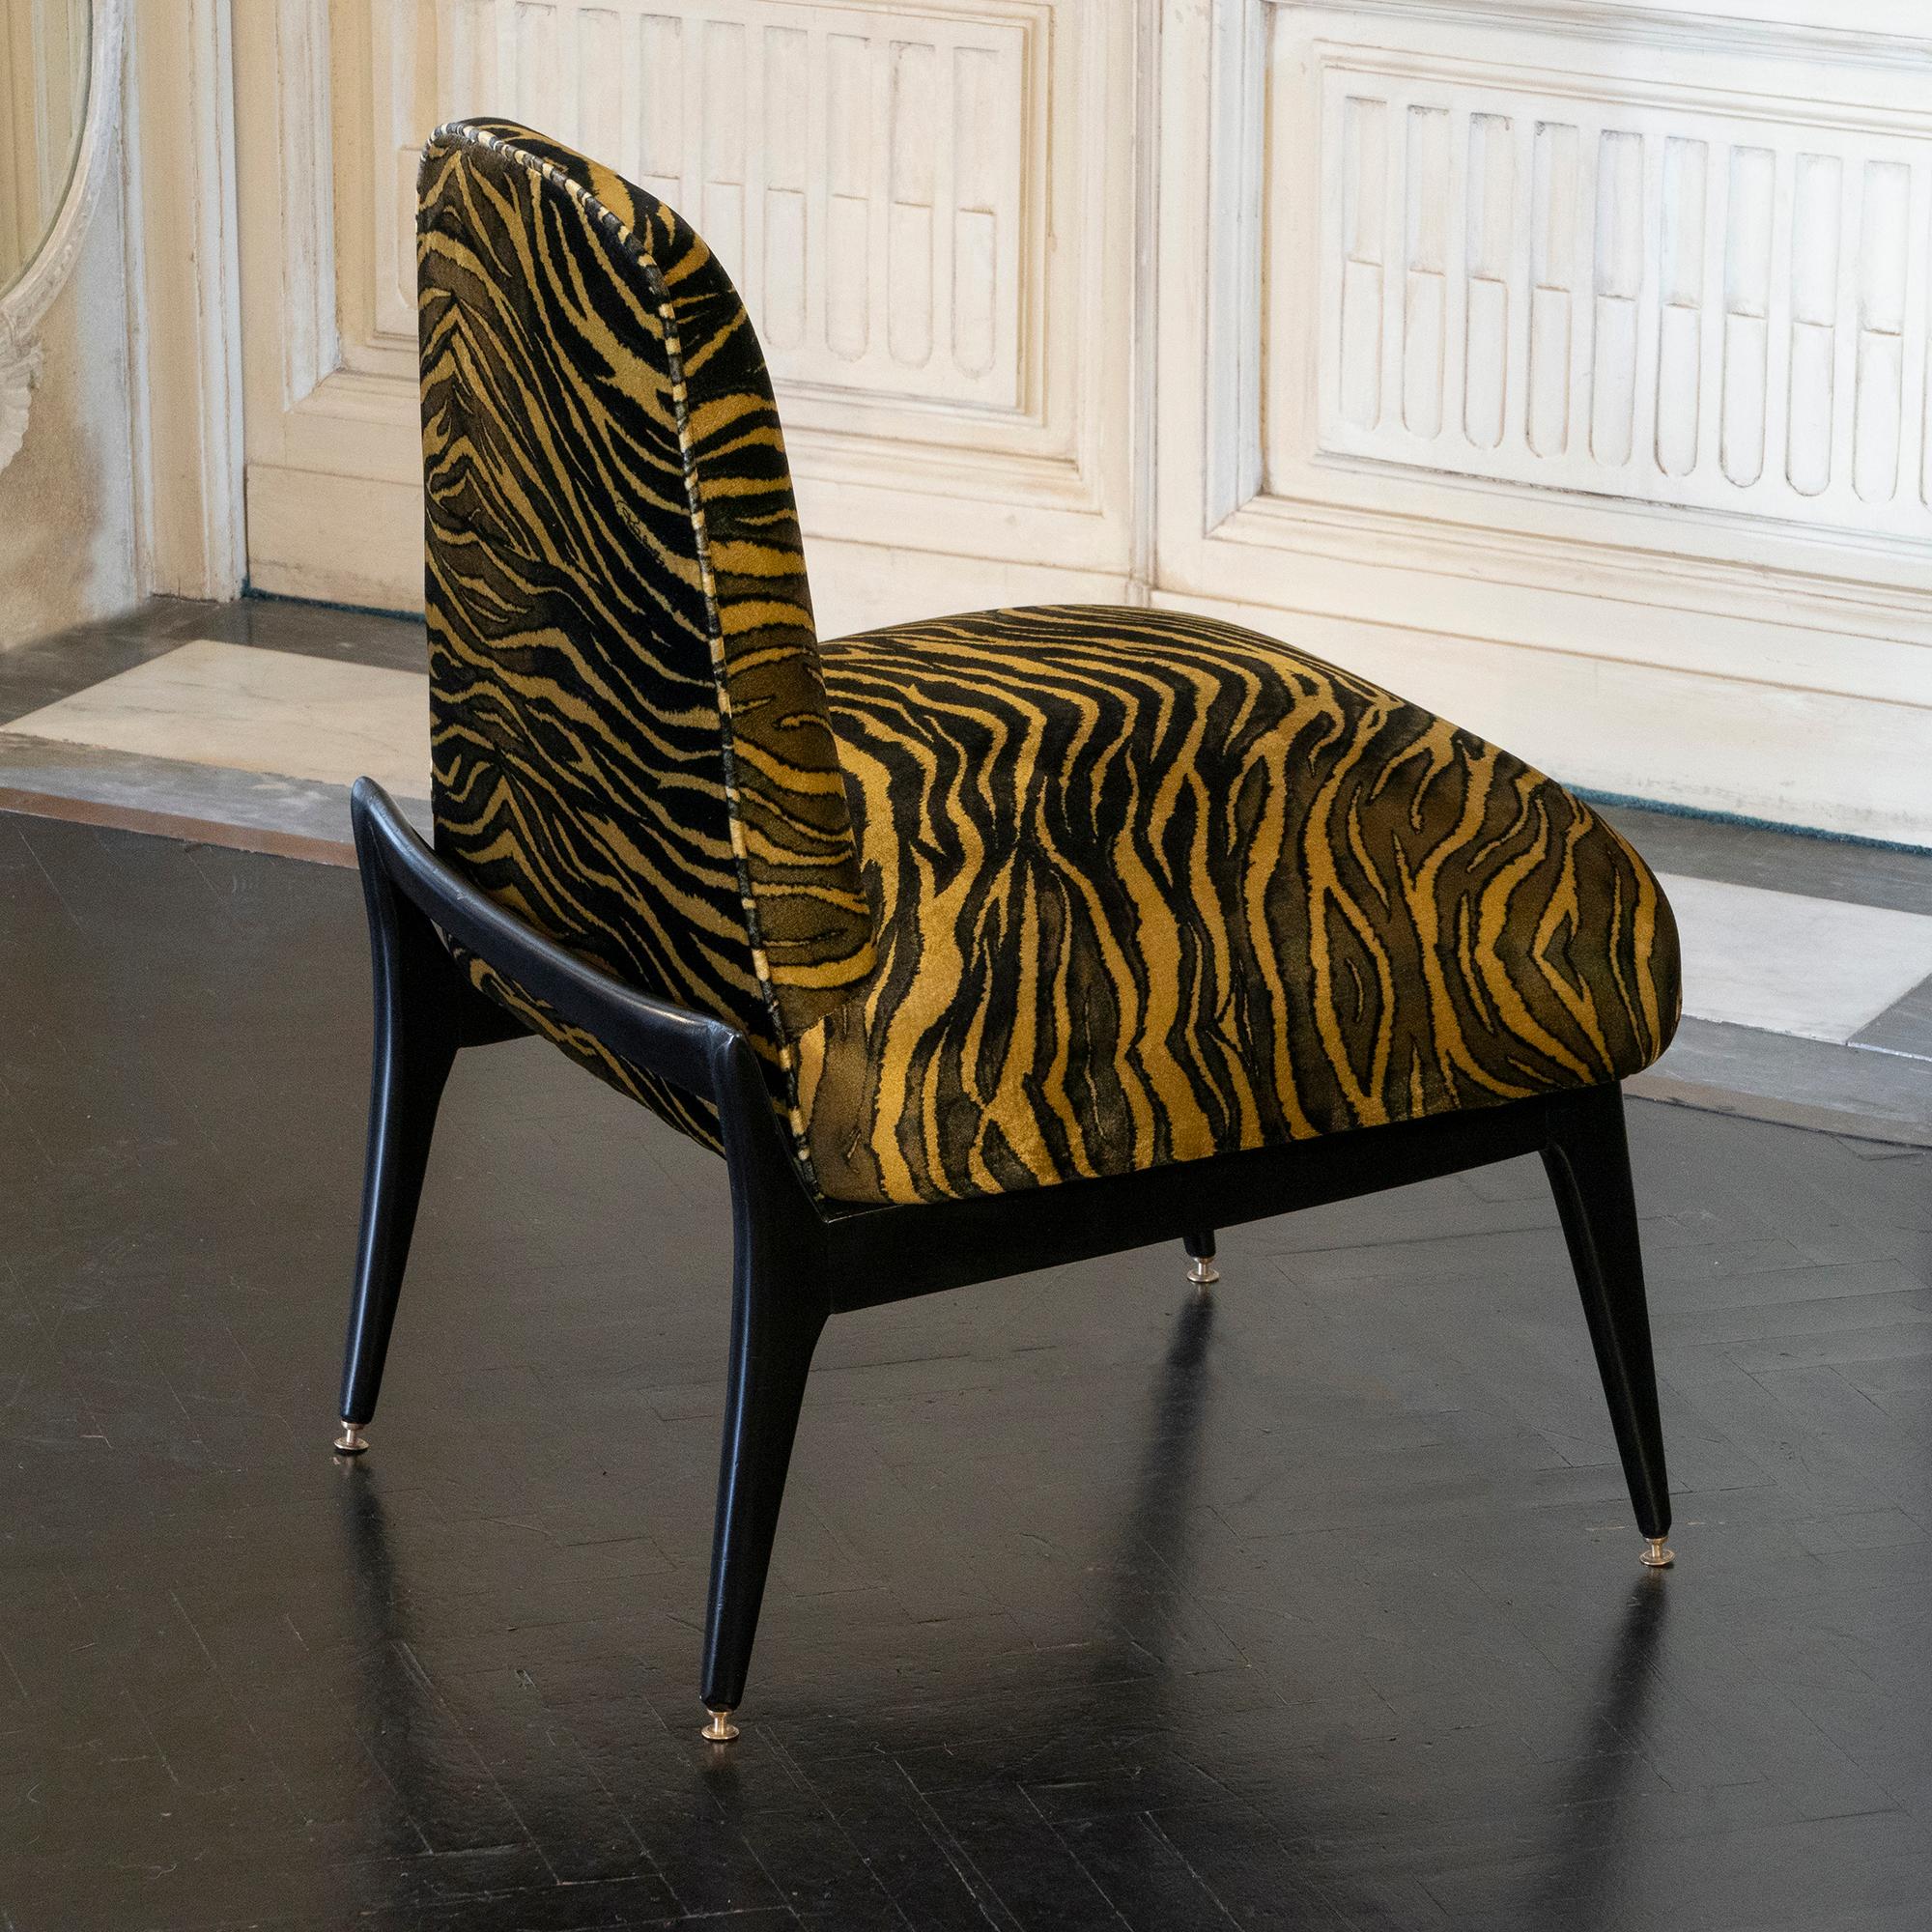 Pair of low lounge chairs, ebonized mahogany base and newly reupholstered with tiger print brown/black and gold silk velvet, brass details, Italy 1950s.